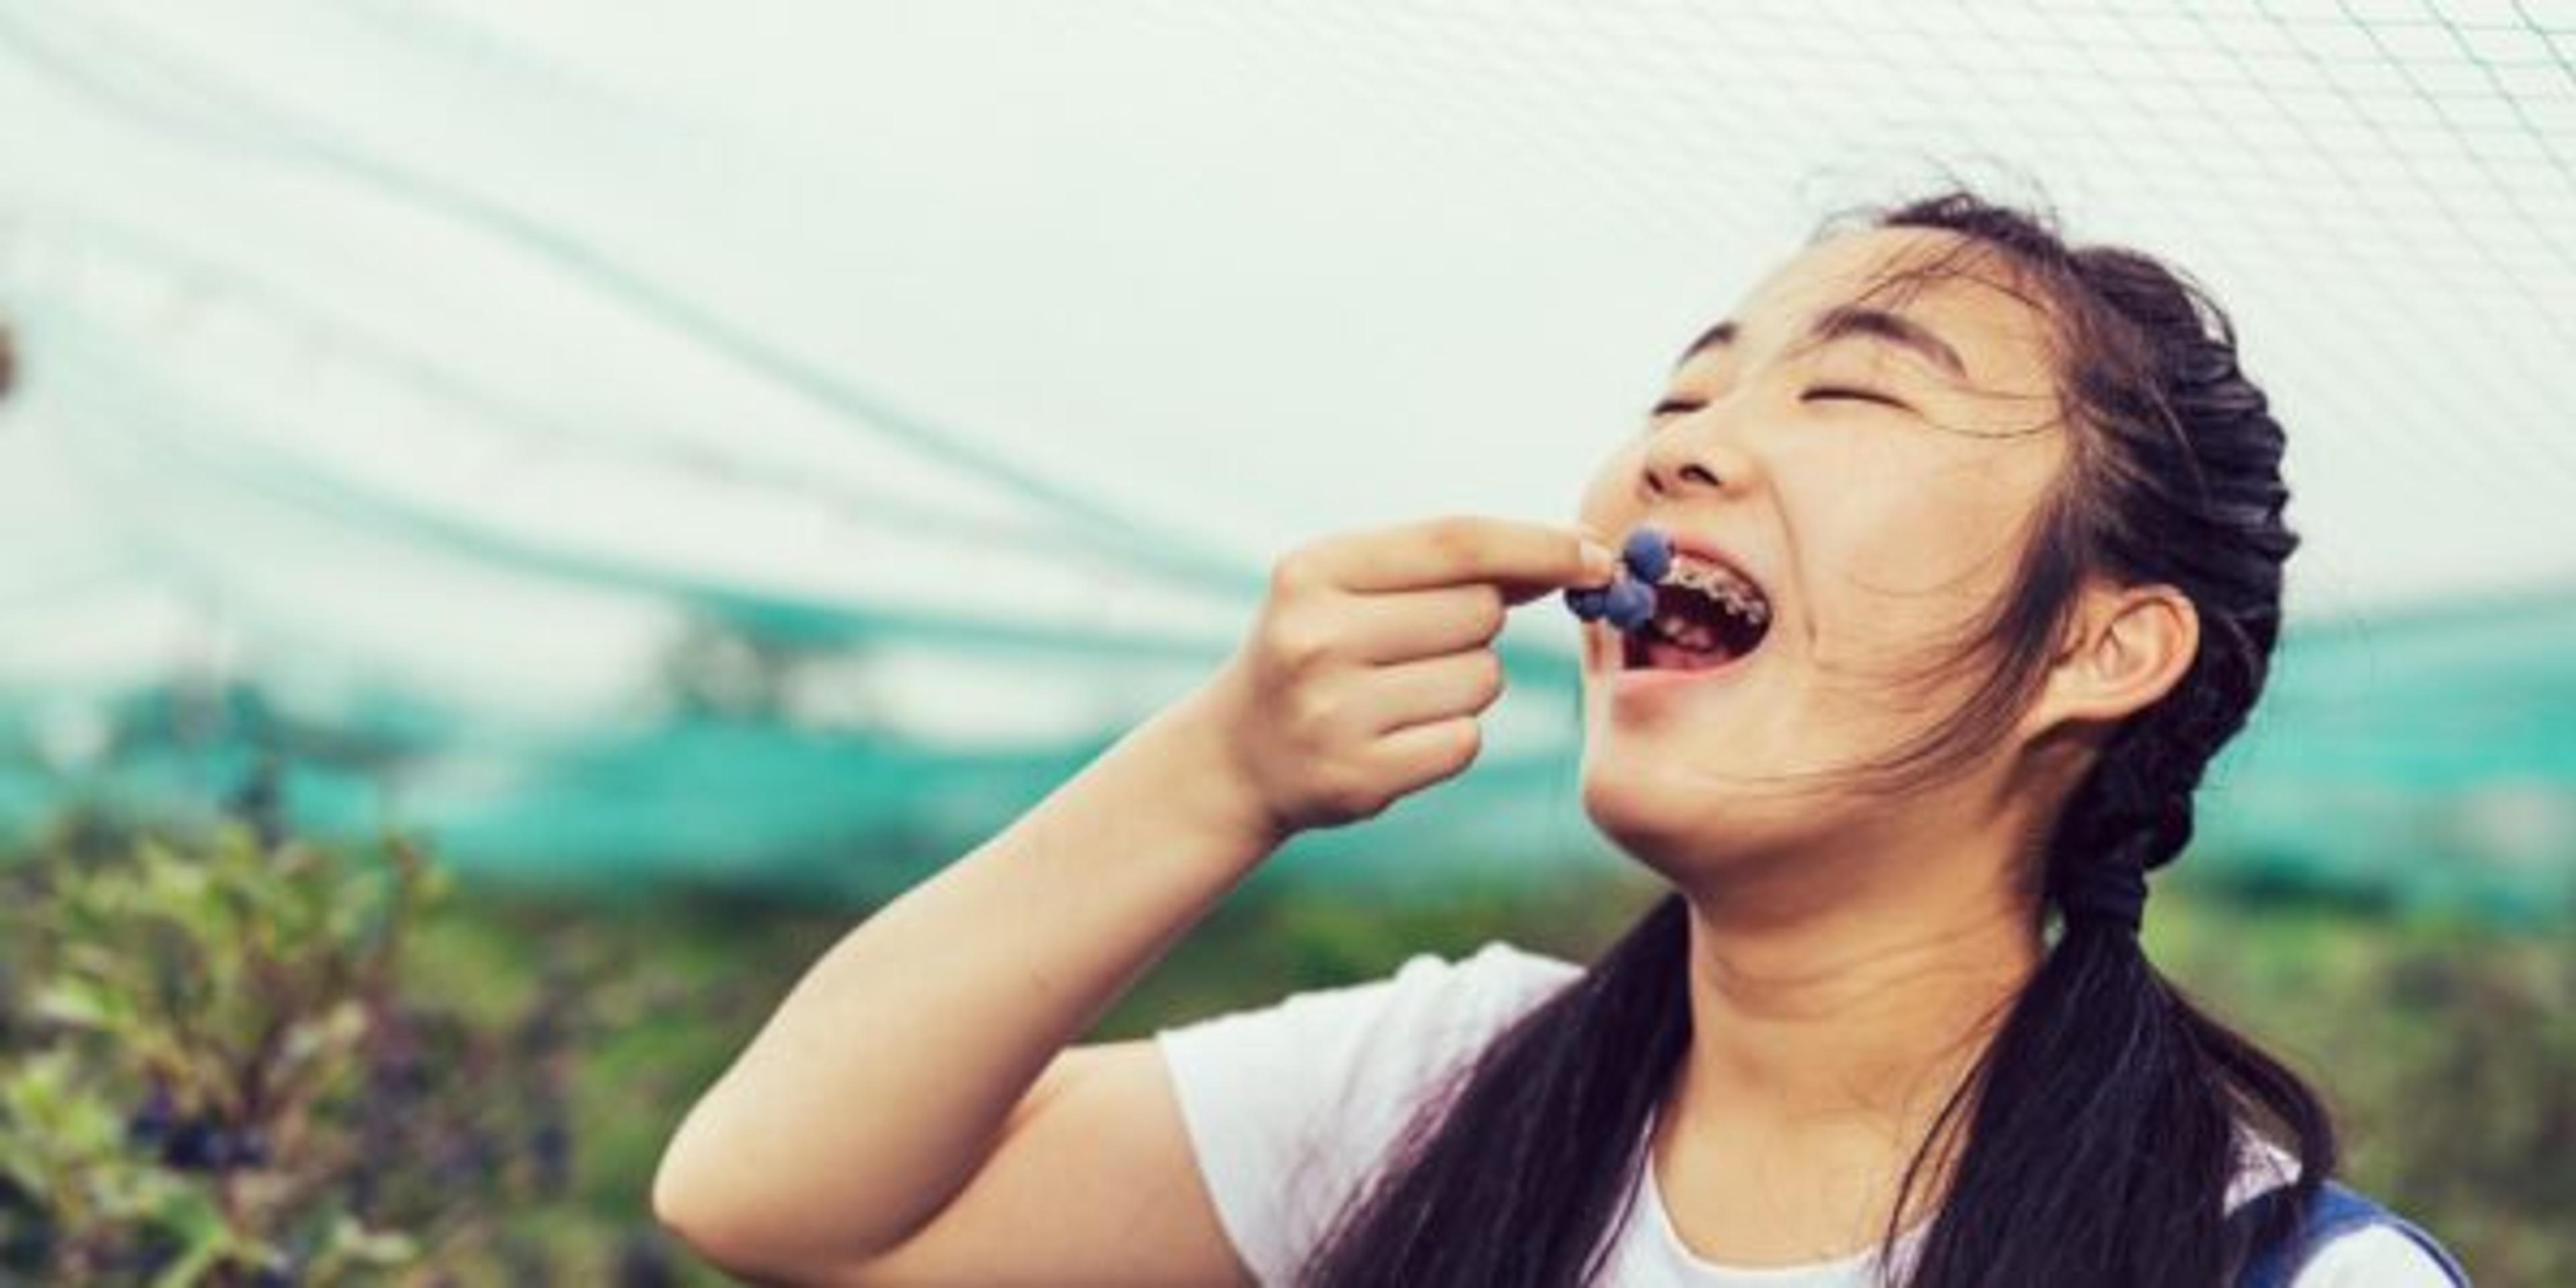 Asian Teenager girl eating fresh blueberry and looking at the camera happily from farm